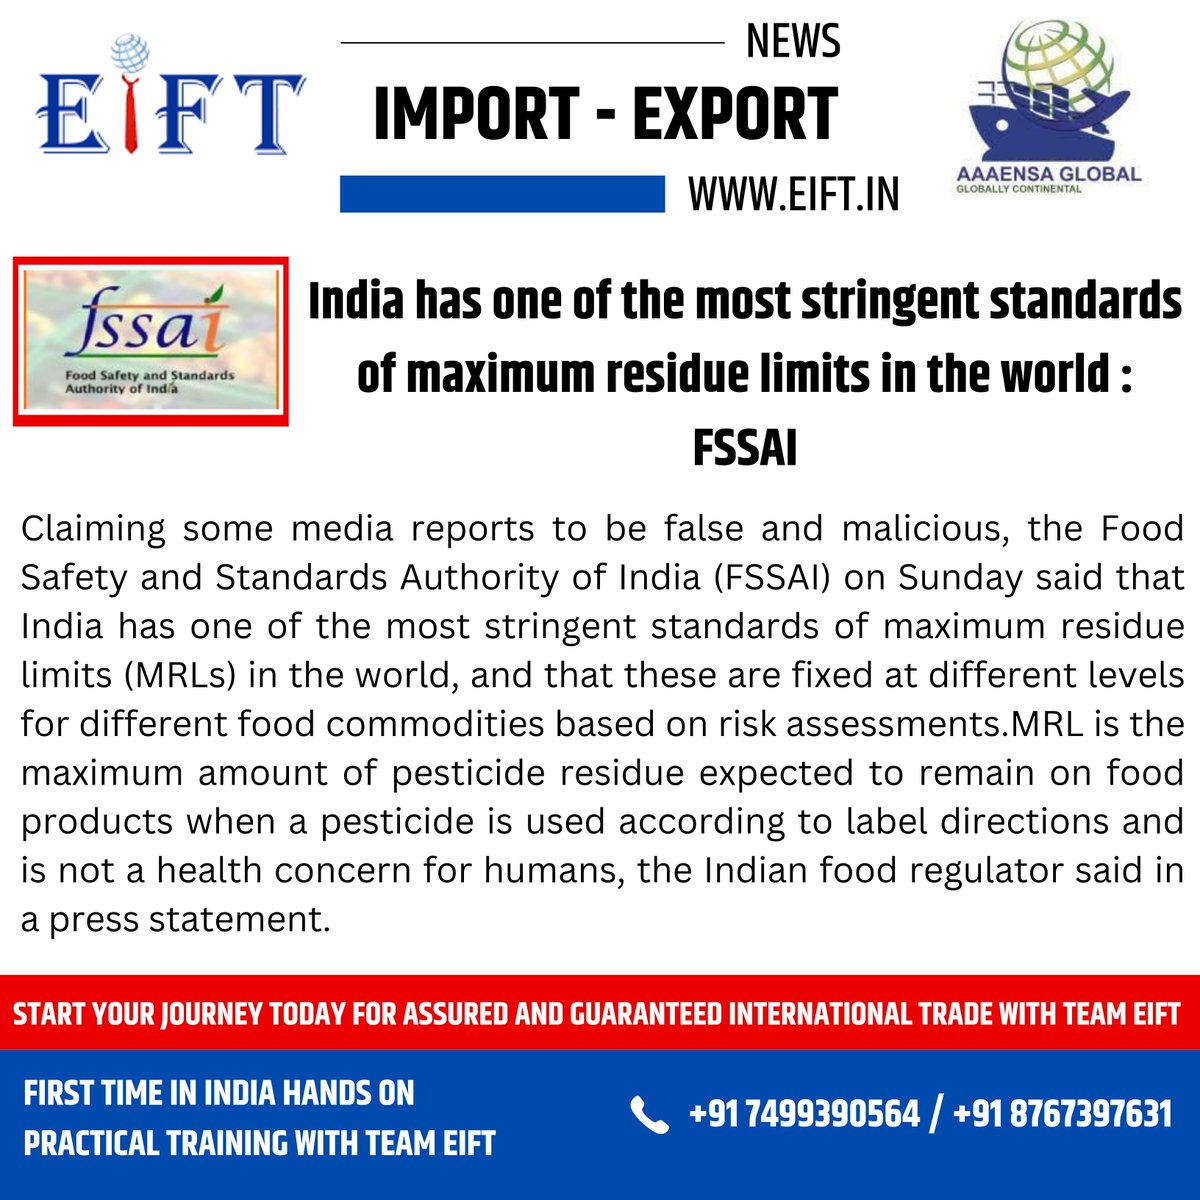 India has one of the most stringent standards of maximum residue limits in the world: FSSAI
.
.
.
#India #FSSAI #FoodStandards #Regulations #Guidelines #QualityControl #FoodSafety #IndianCuisine #Government #Health #Certification #Standards  #eiftinstitute  #pune